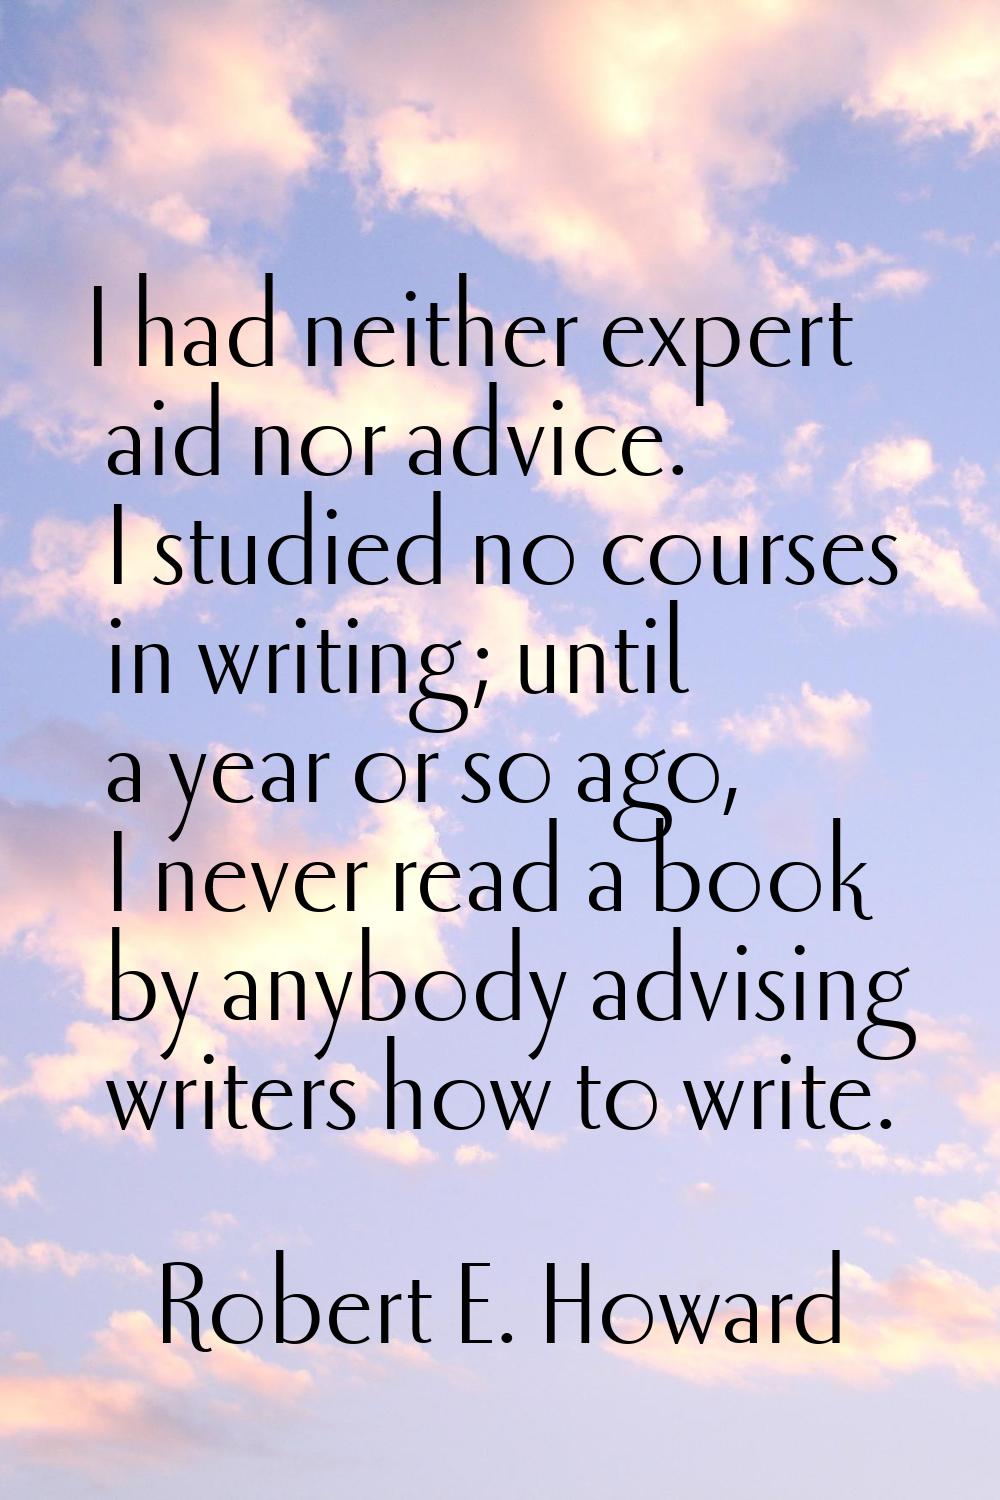 I had neither expert aid nor advice. I studied no courses in writing; until a year or so ago, I nev